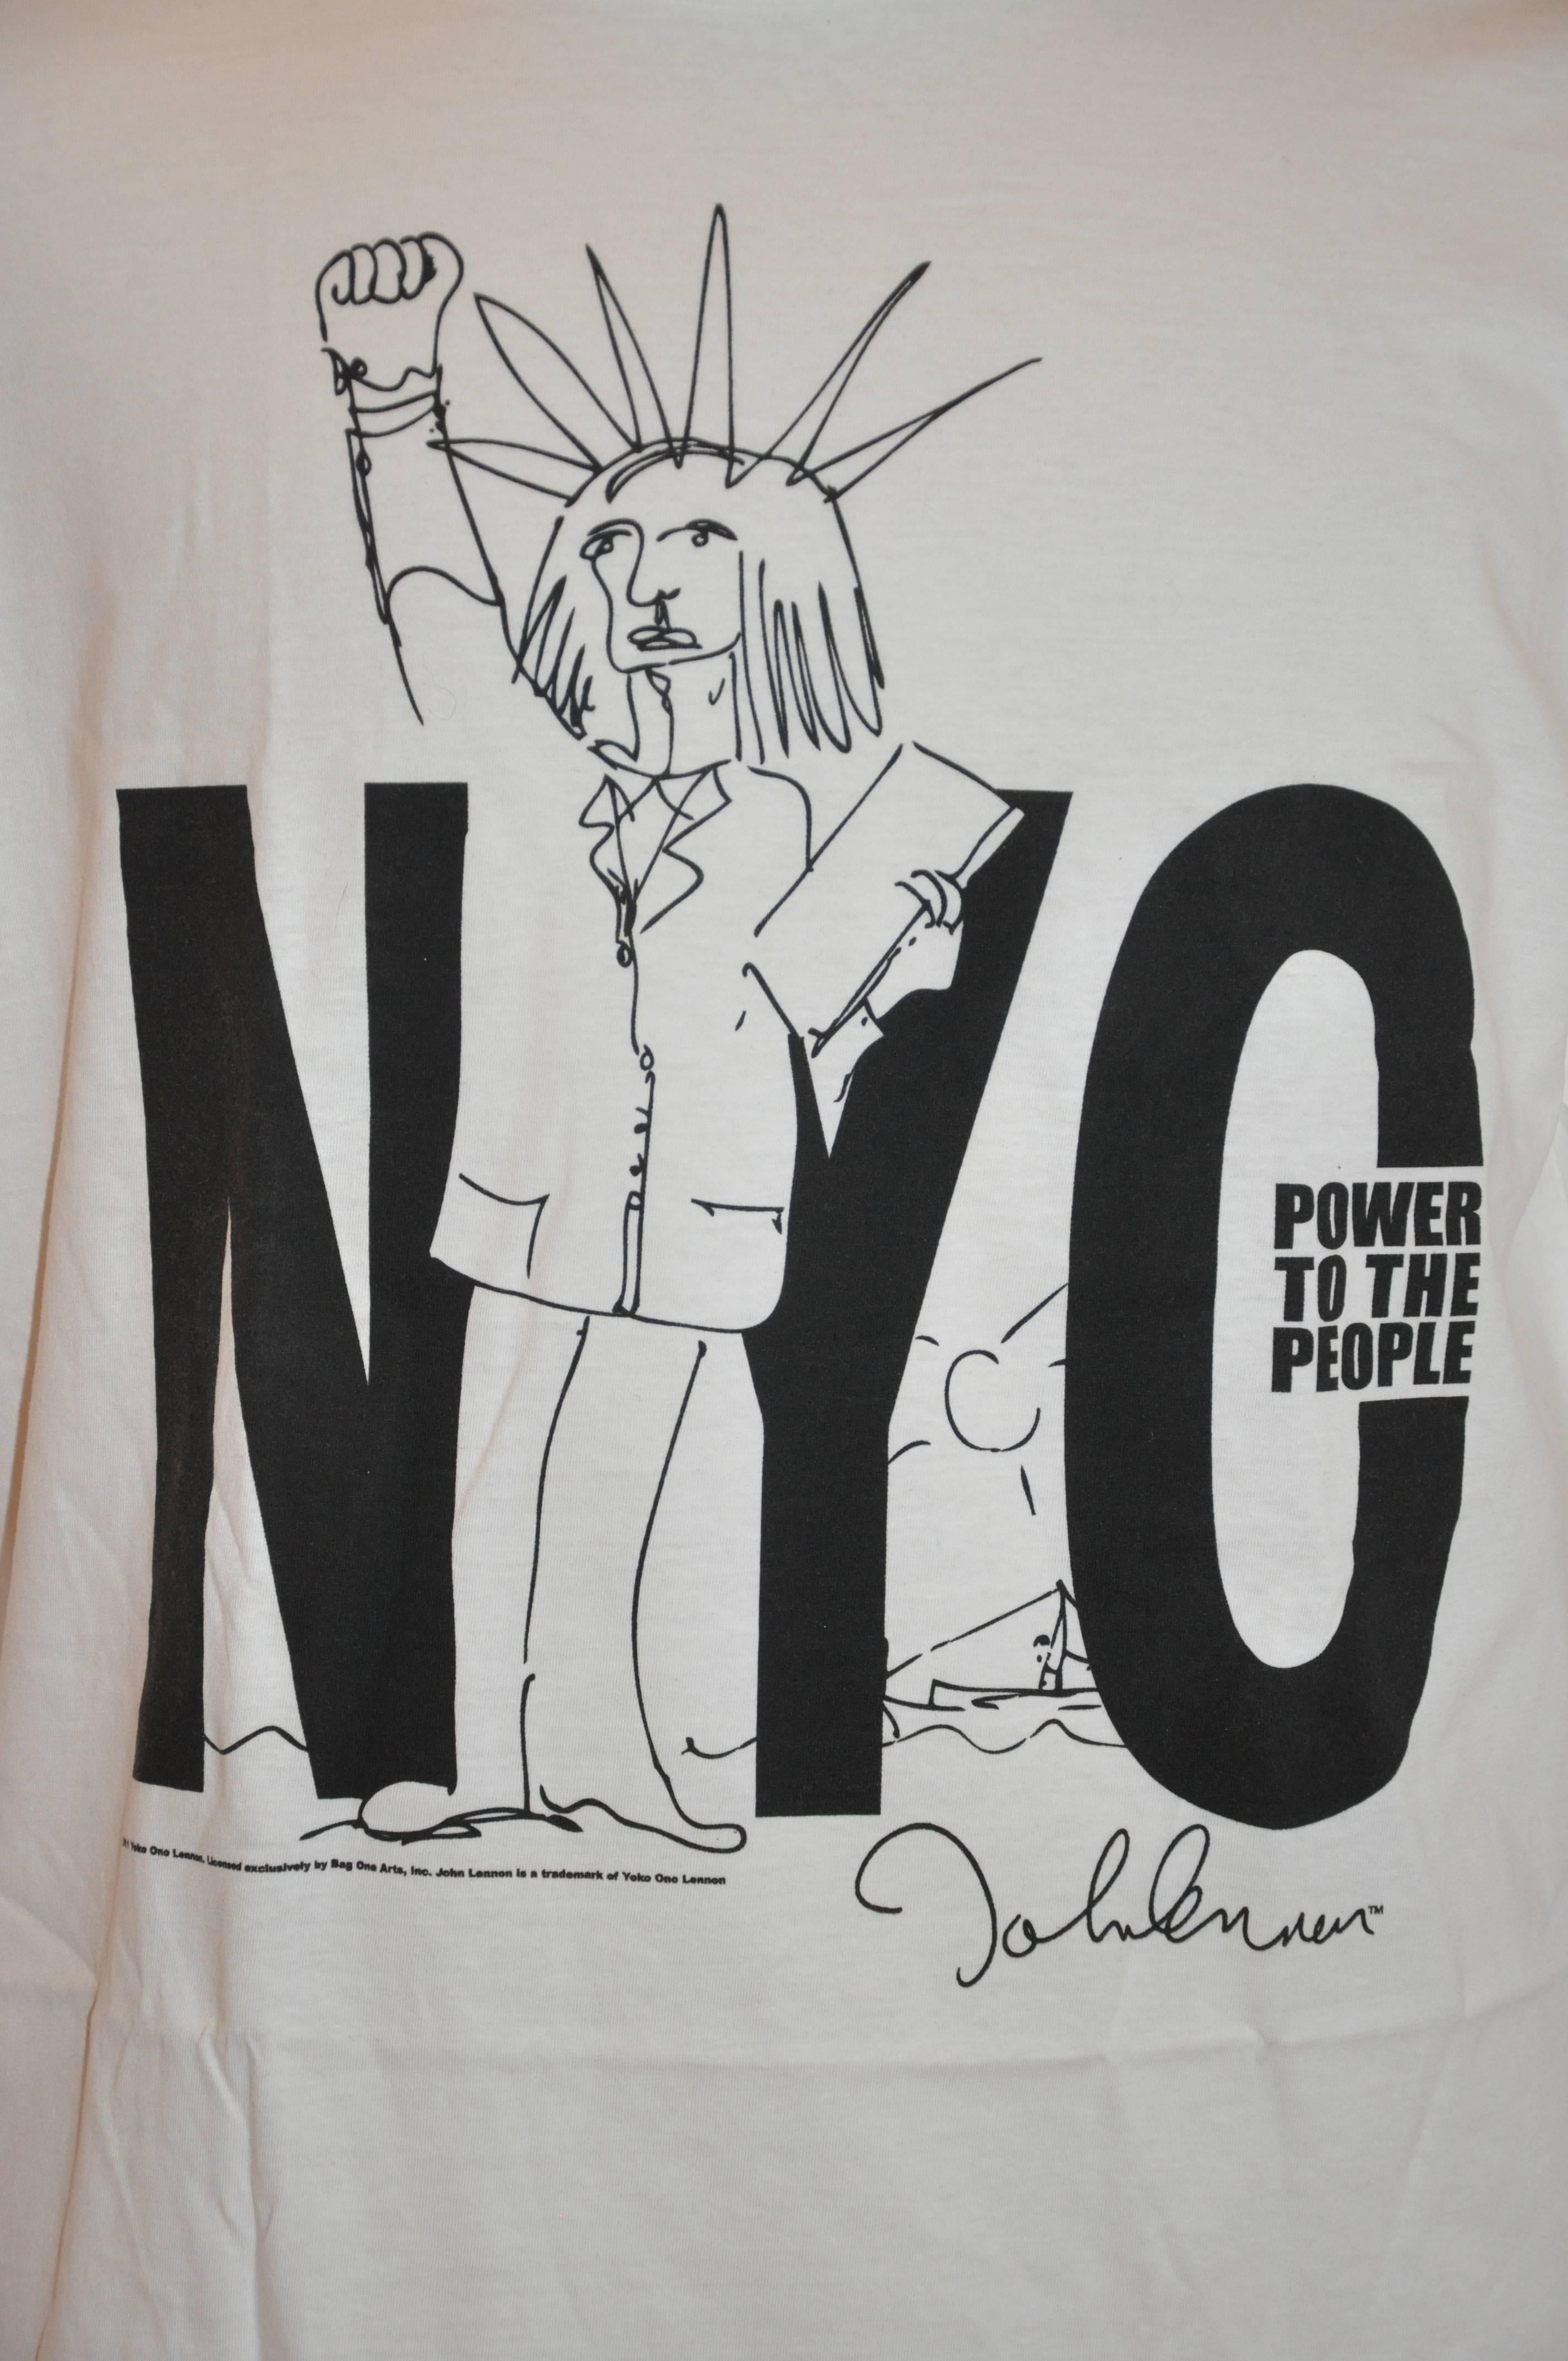 John Lennon "Limited Edition" "Power To The People" with drawing by John Lennon white cotton men's tee measures 22" across the shoulder, length is 30 1/2", underarm circumference is 48 1/4". Size is ex-large.